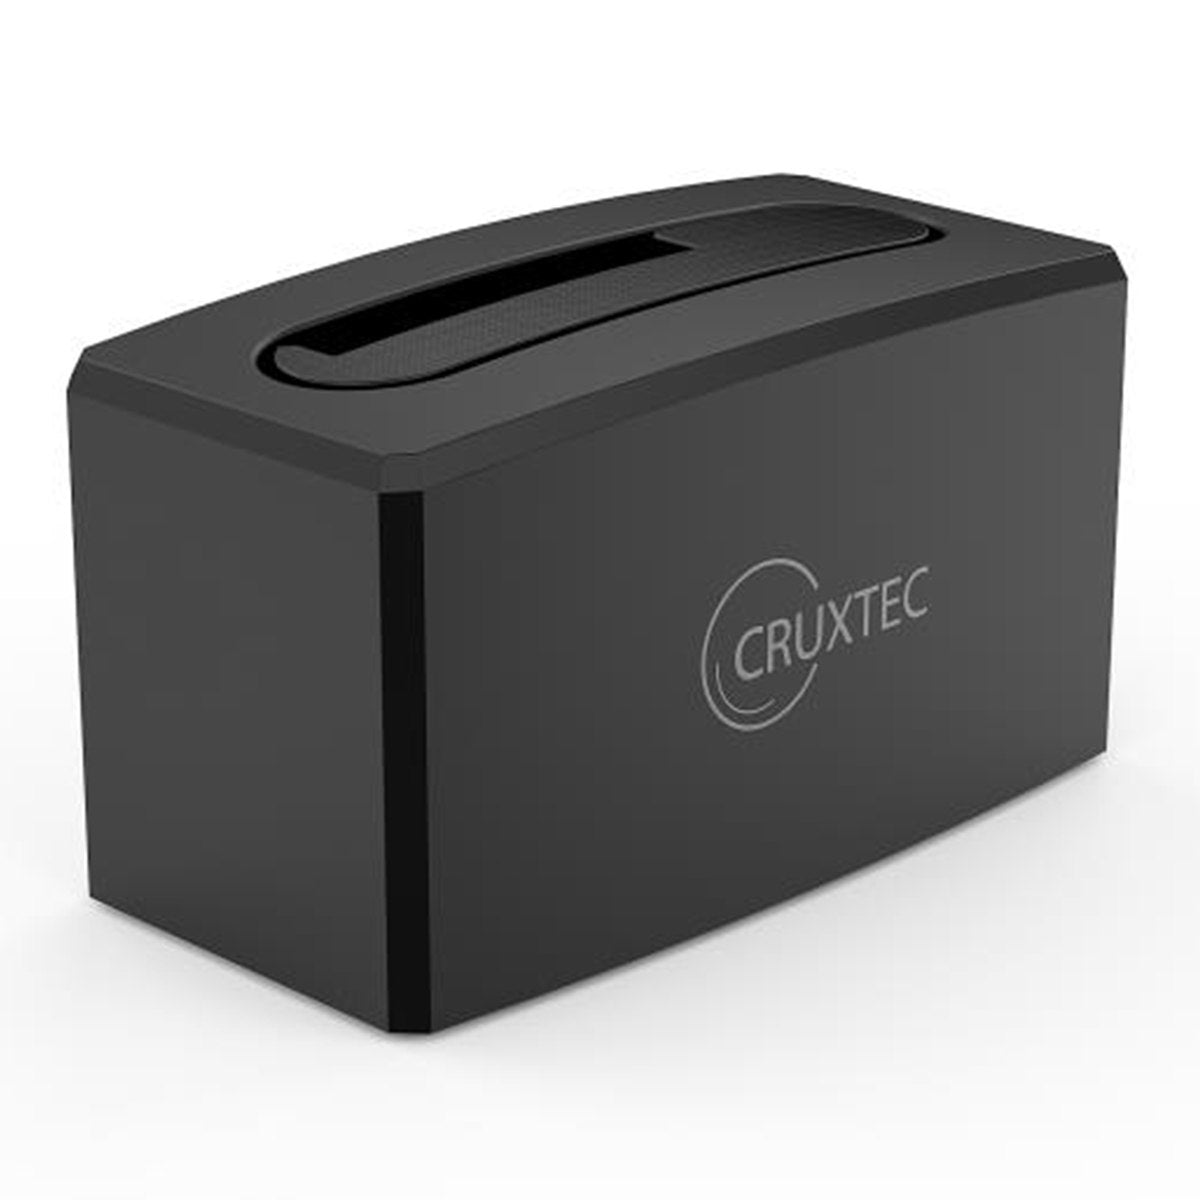 Cruxtec USB 3.0 SATA Hard Drive Docking Station for 2.5” and 3.5'' HDD/SSD